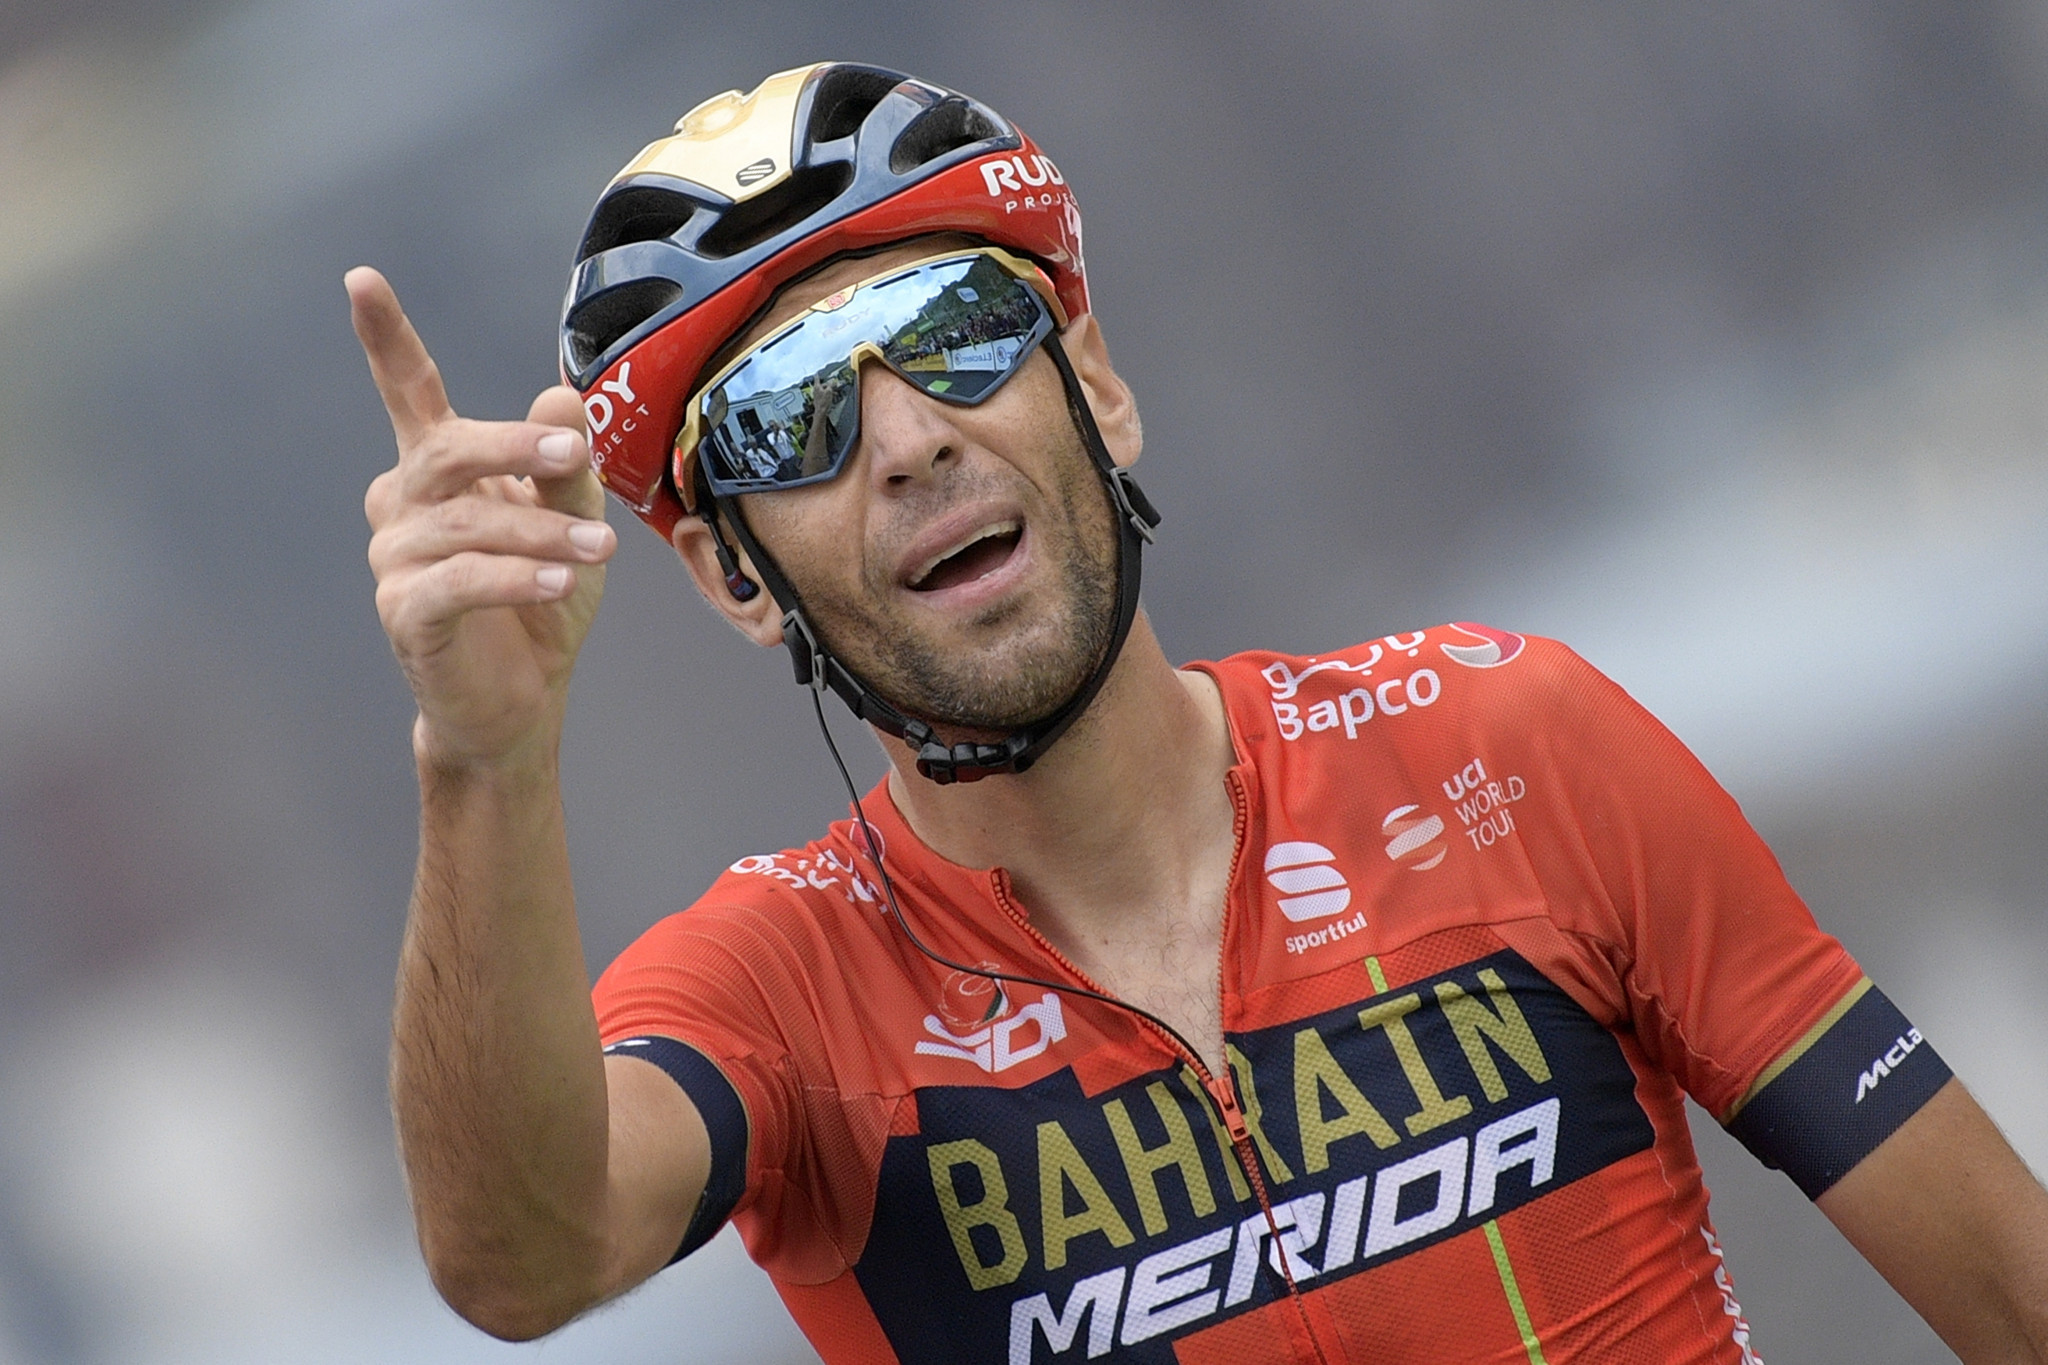 Vincenzo Nibali will skip the Tour de France to focus on Tokyo 2020 ©Getty Images